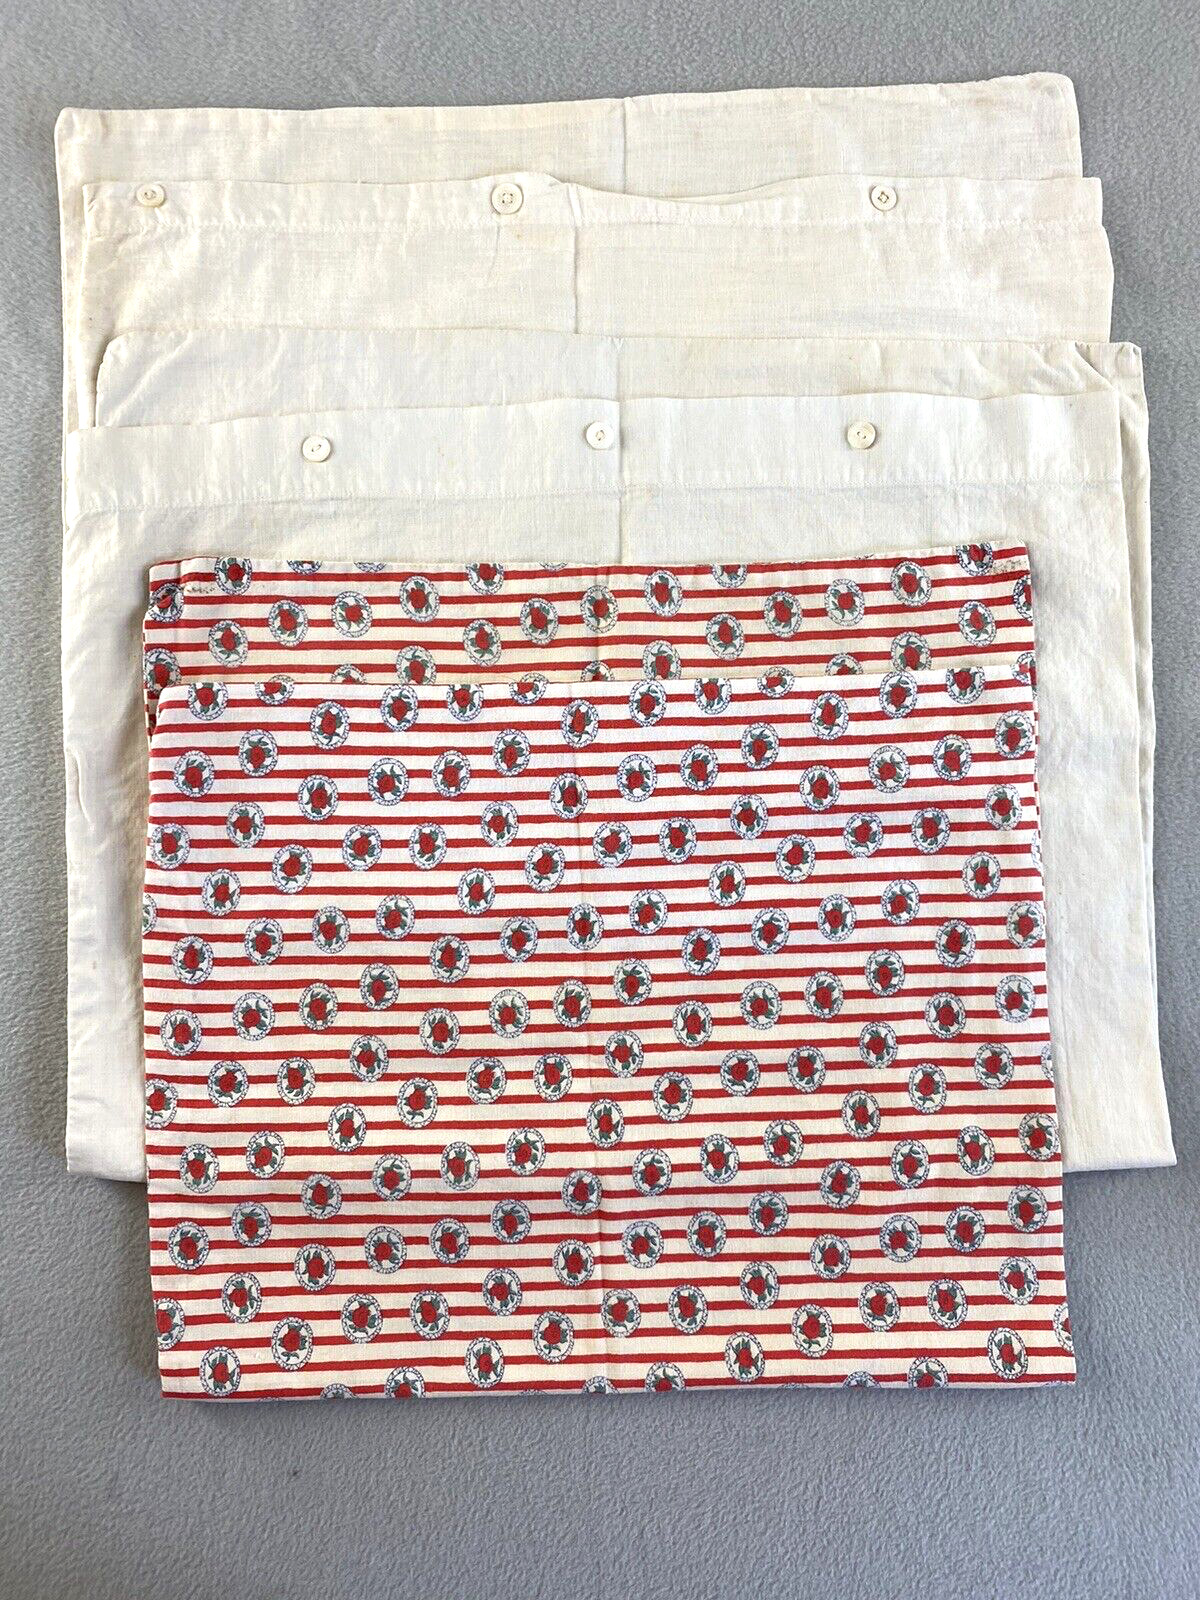 Vintage Antique Handmade Pillow Cases White Button Close and Red Stripe Lot of 3